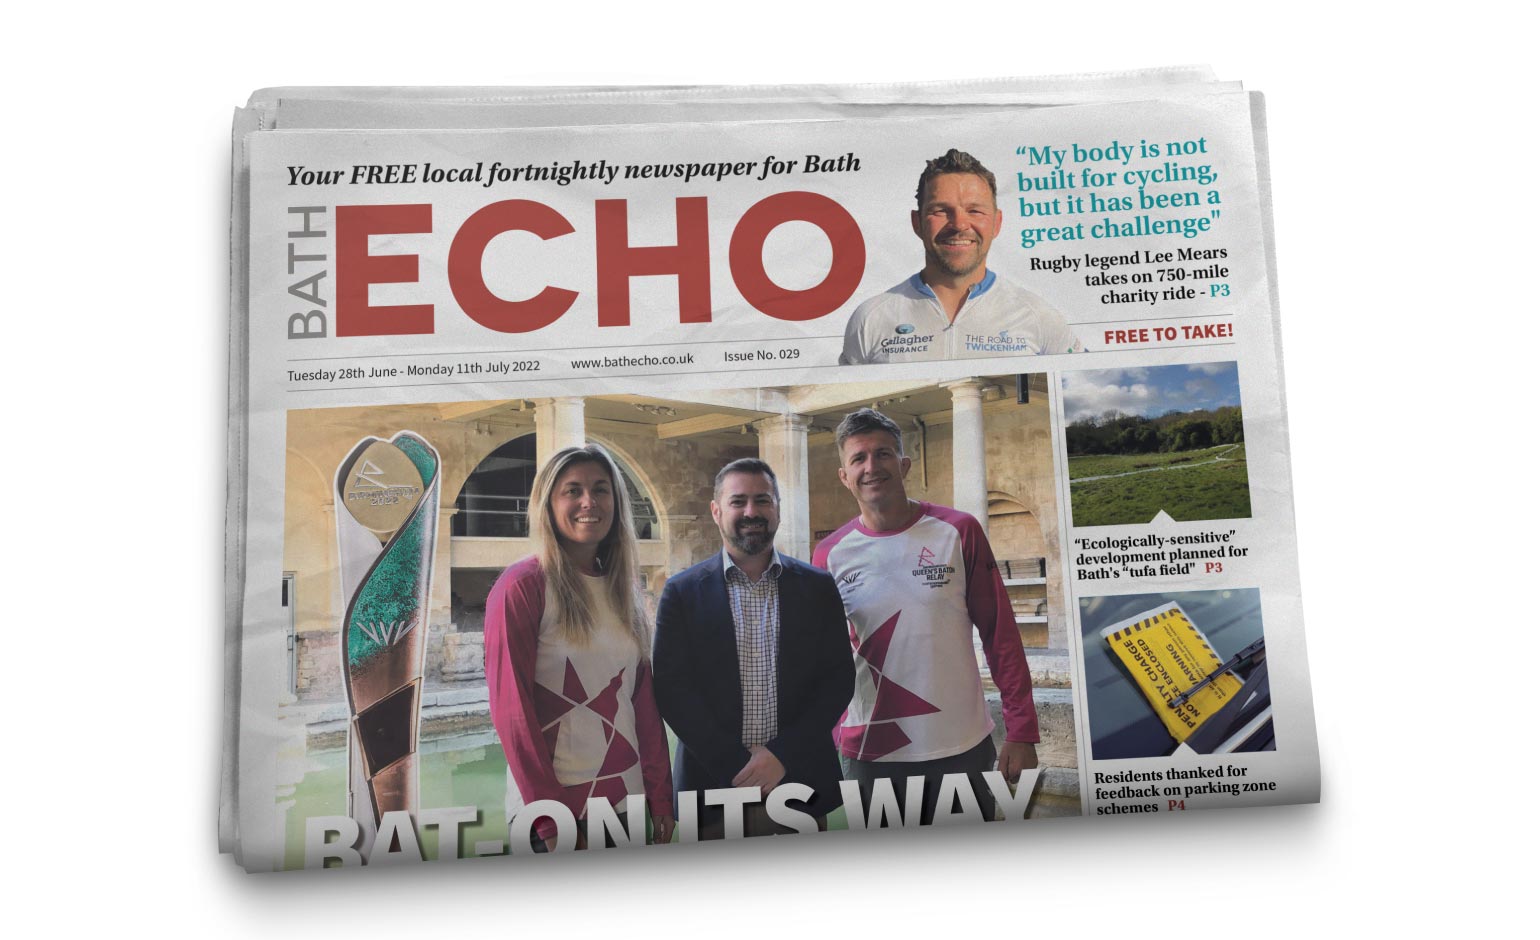 Independent newspaper relaunches print edition across the Bath area